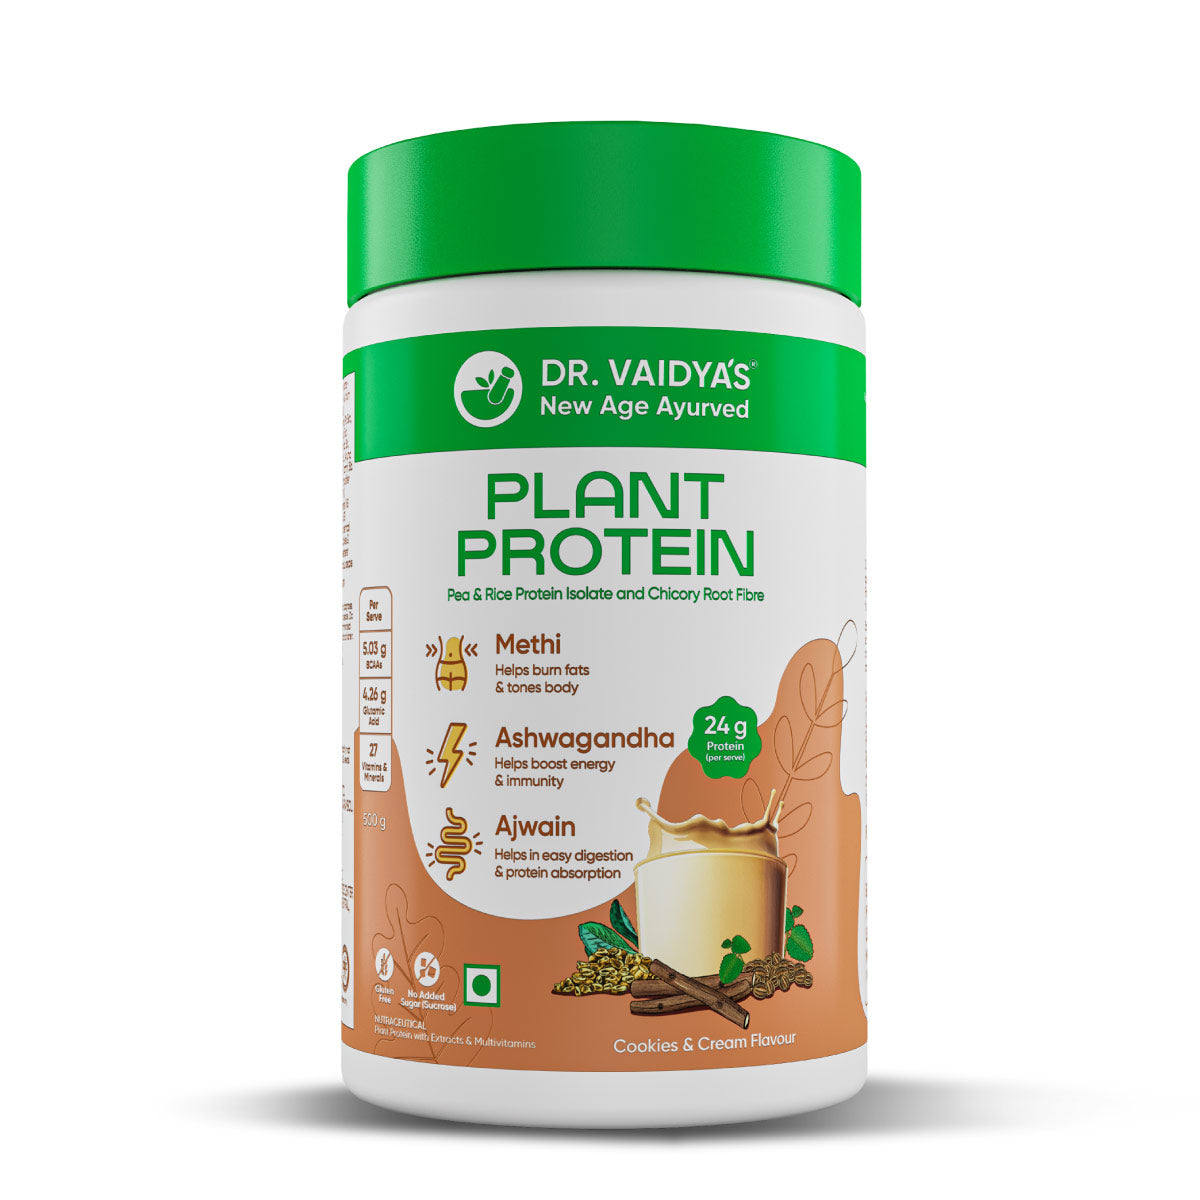 Plant Protein Powder (Cookies & Cream): First-Ever Plant Protein Enriched With Power Of 6 Super Herbs by Dr. Vaidya's